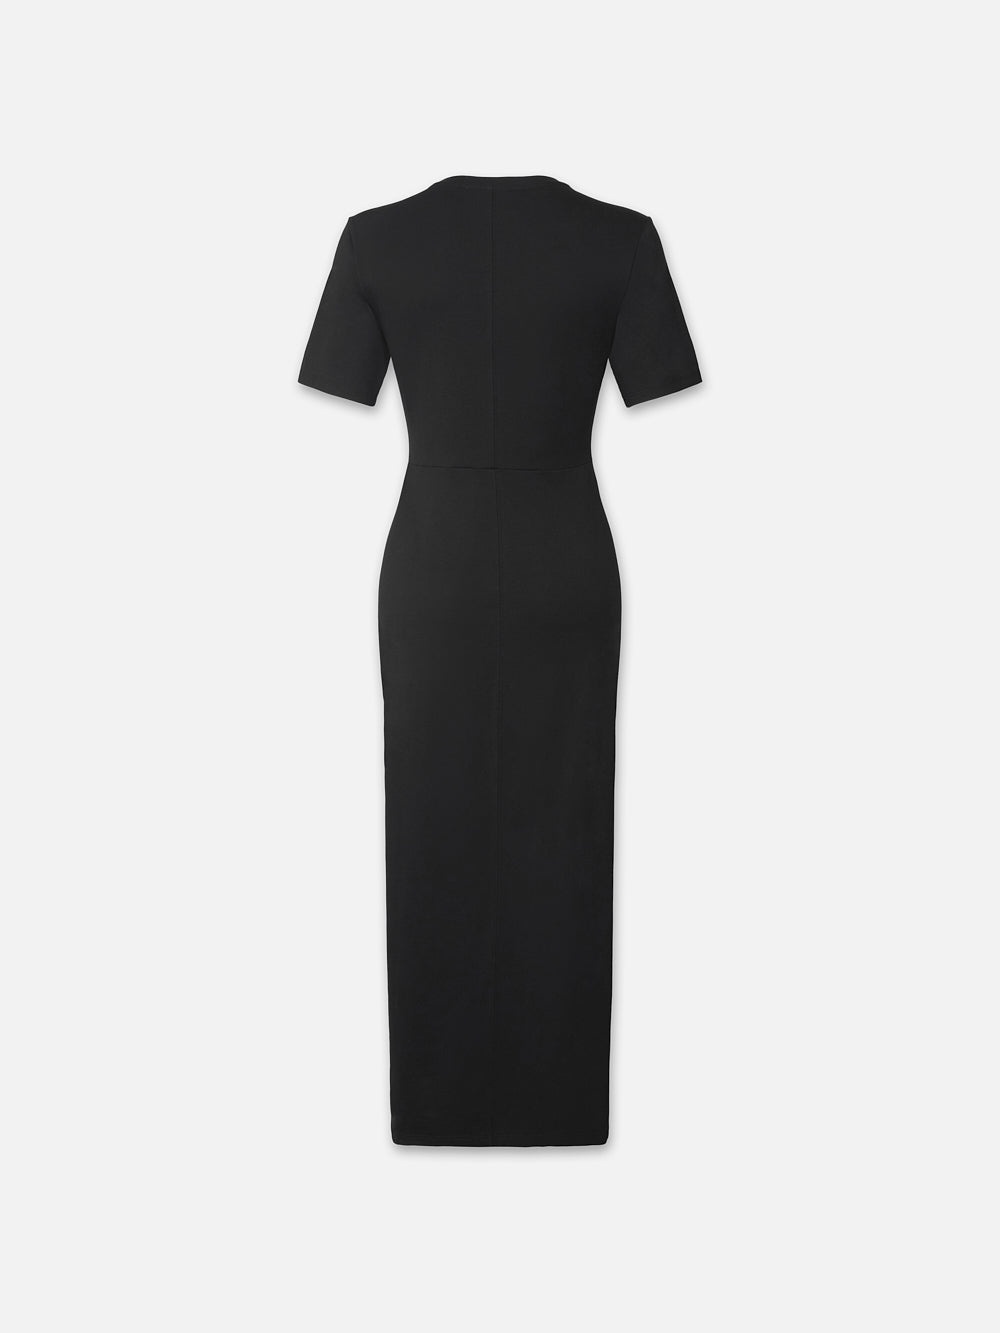 Ruched Front Tie Dress in Black - 4